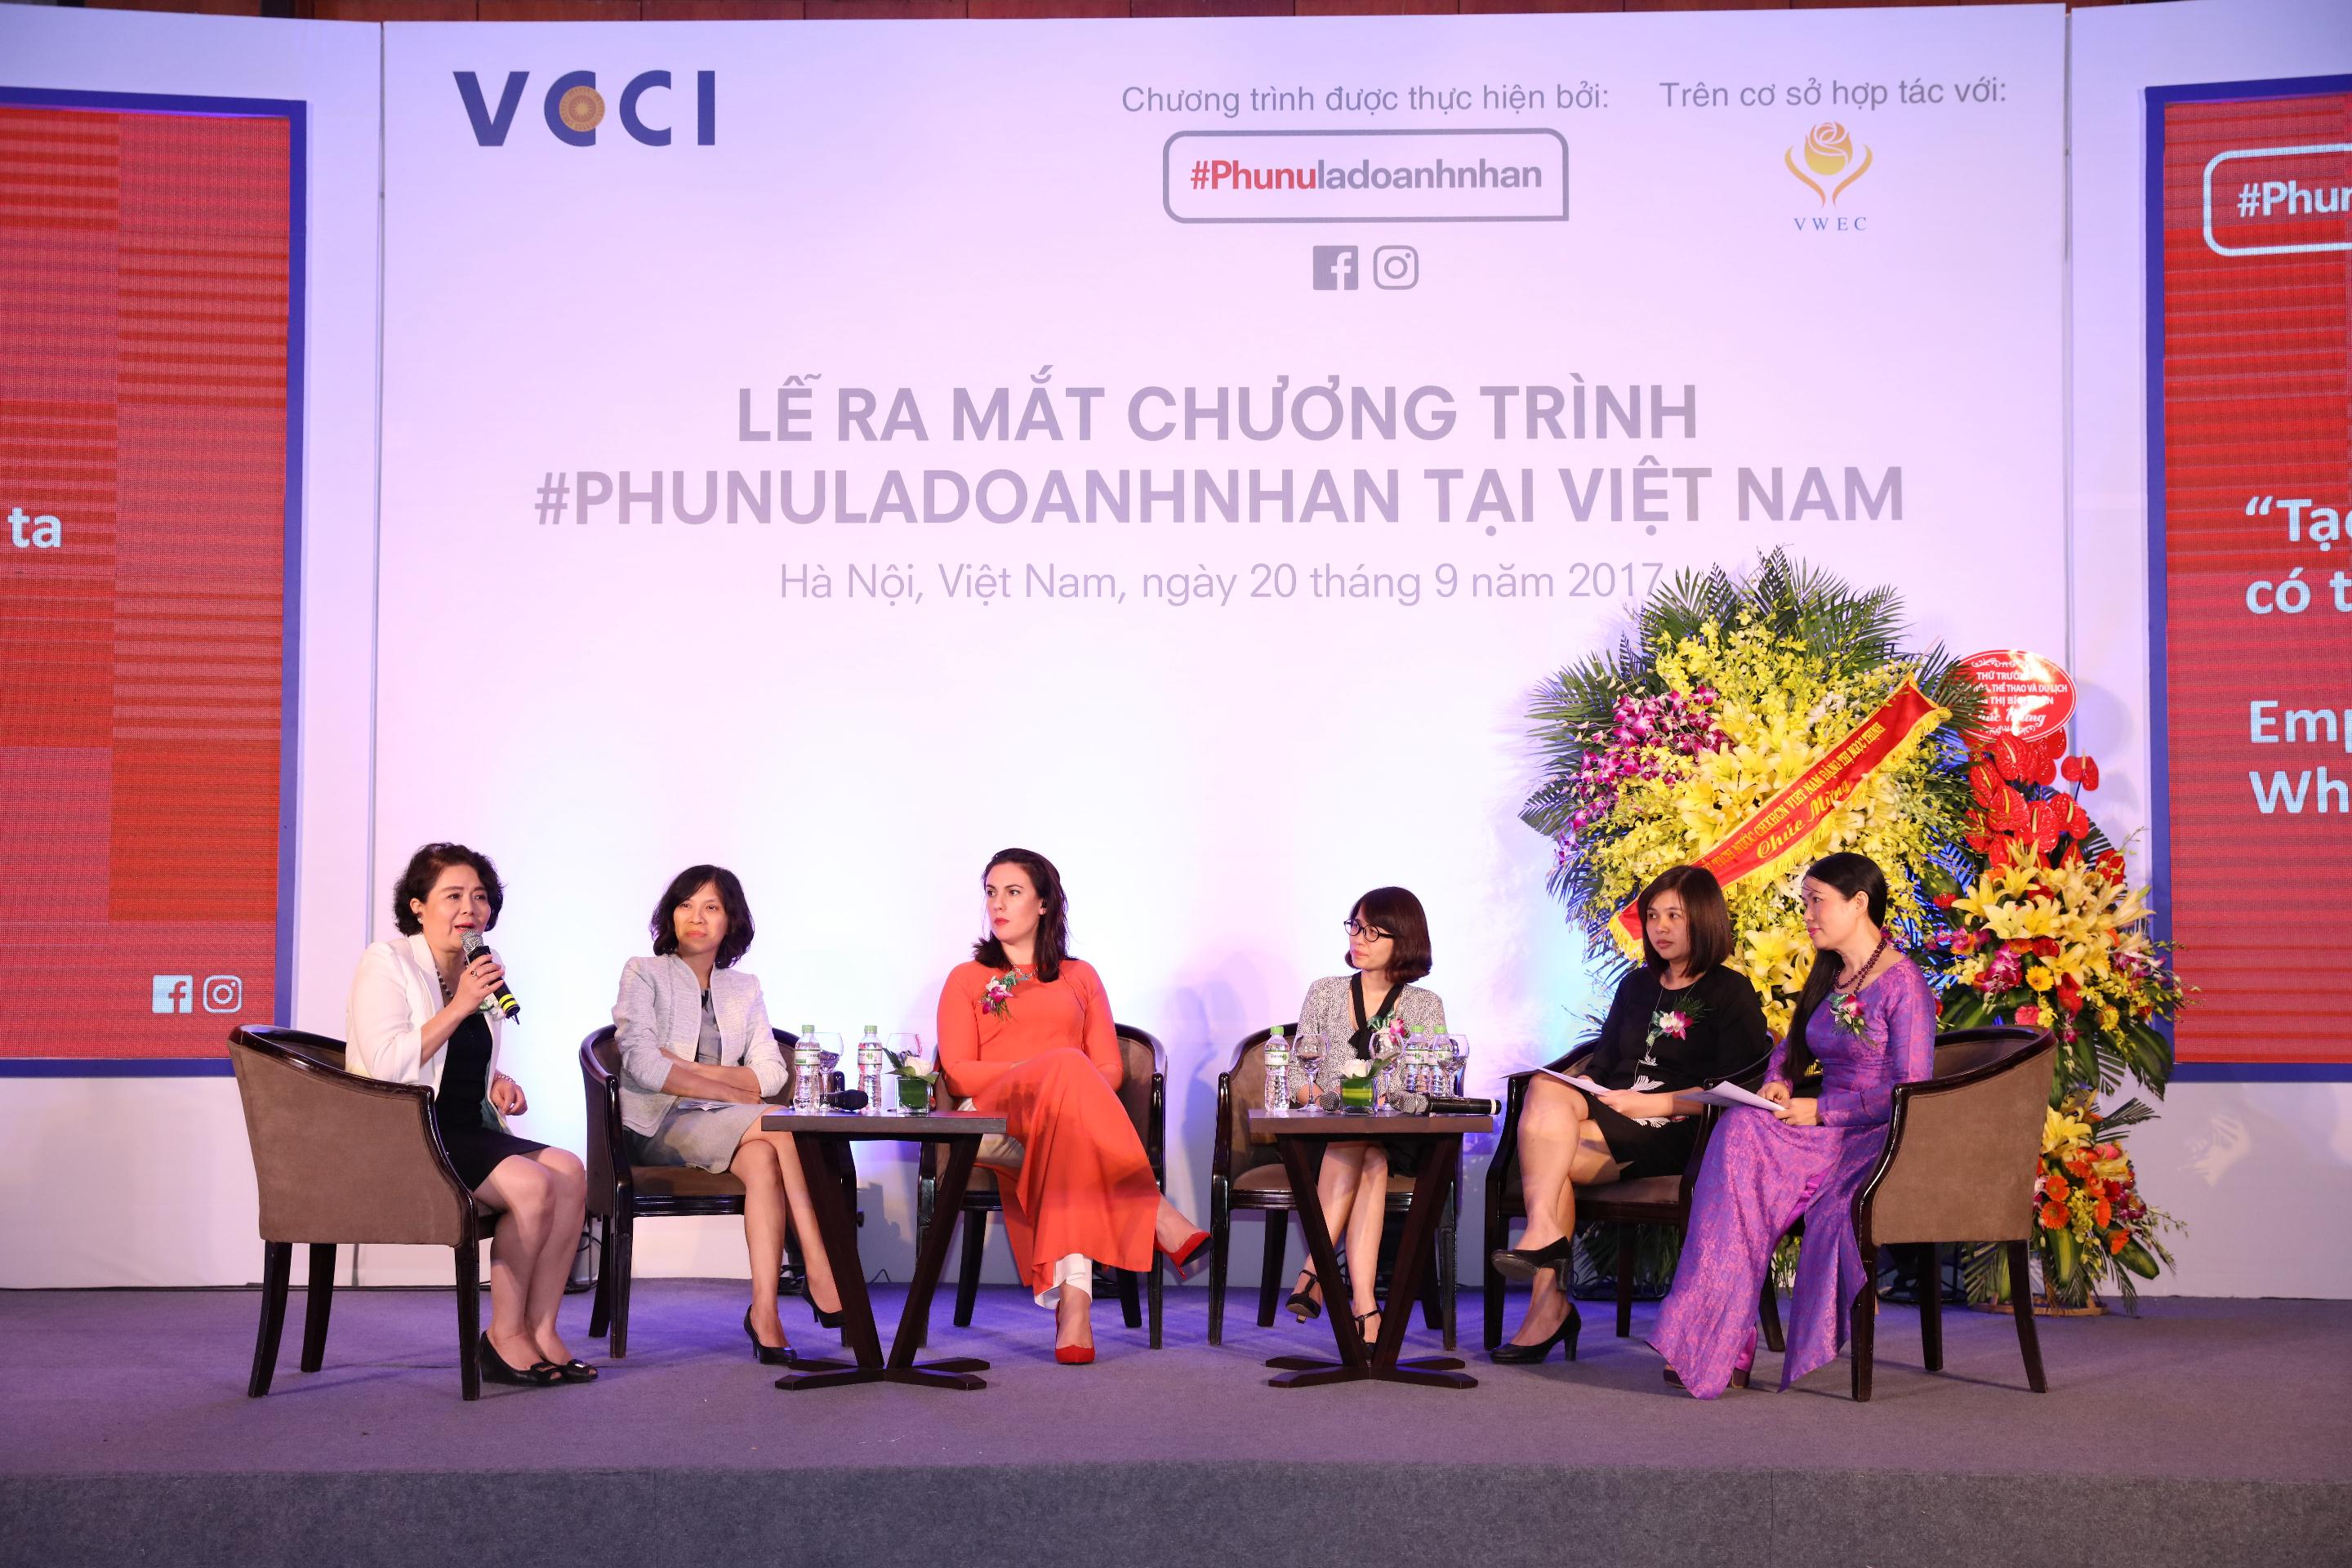 #SheMeansBusiness launched to support Vietnamese women entrepreneurs